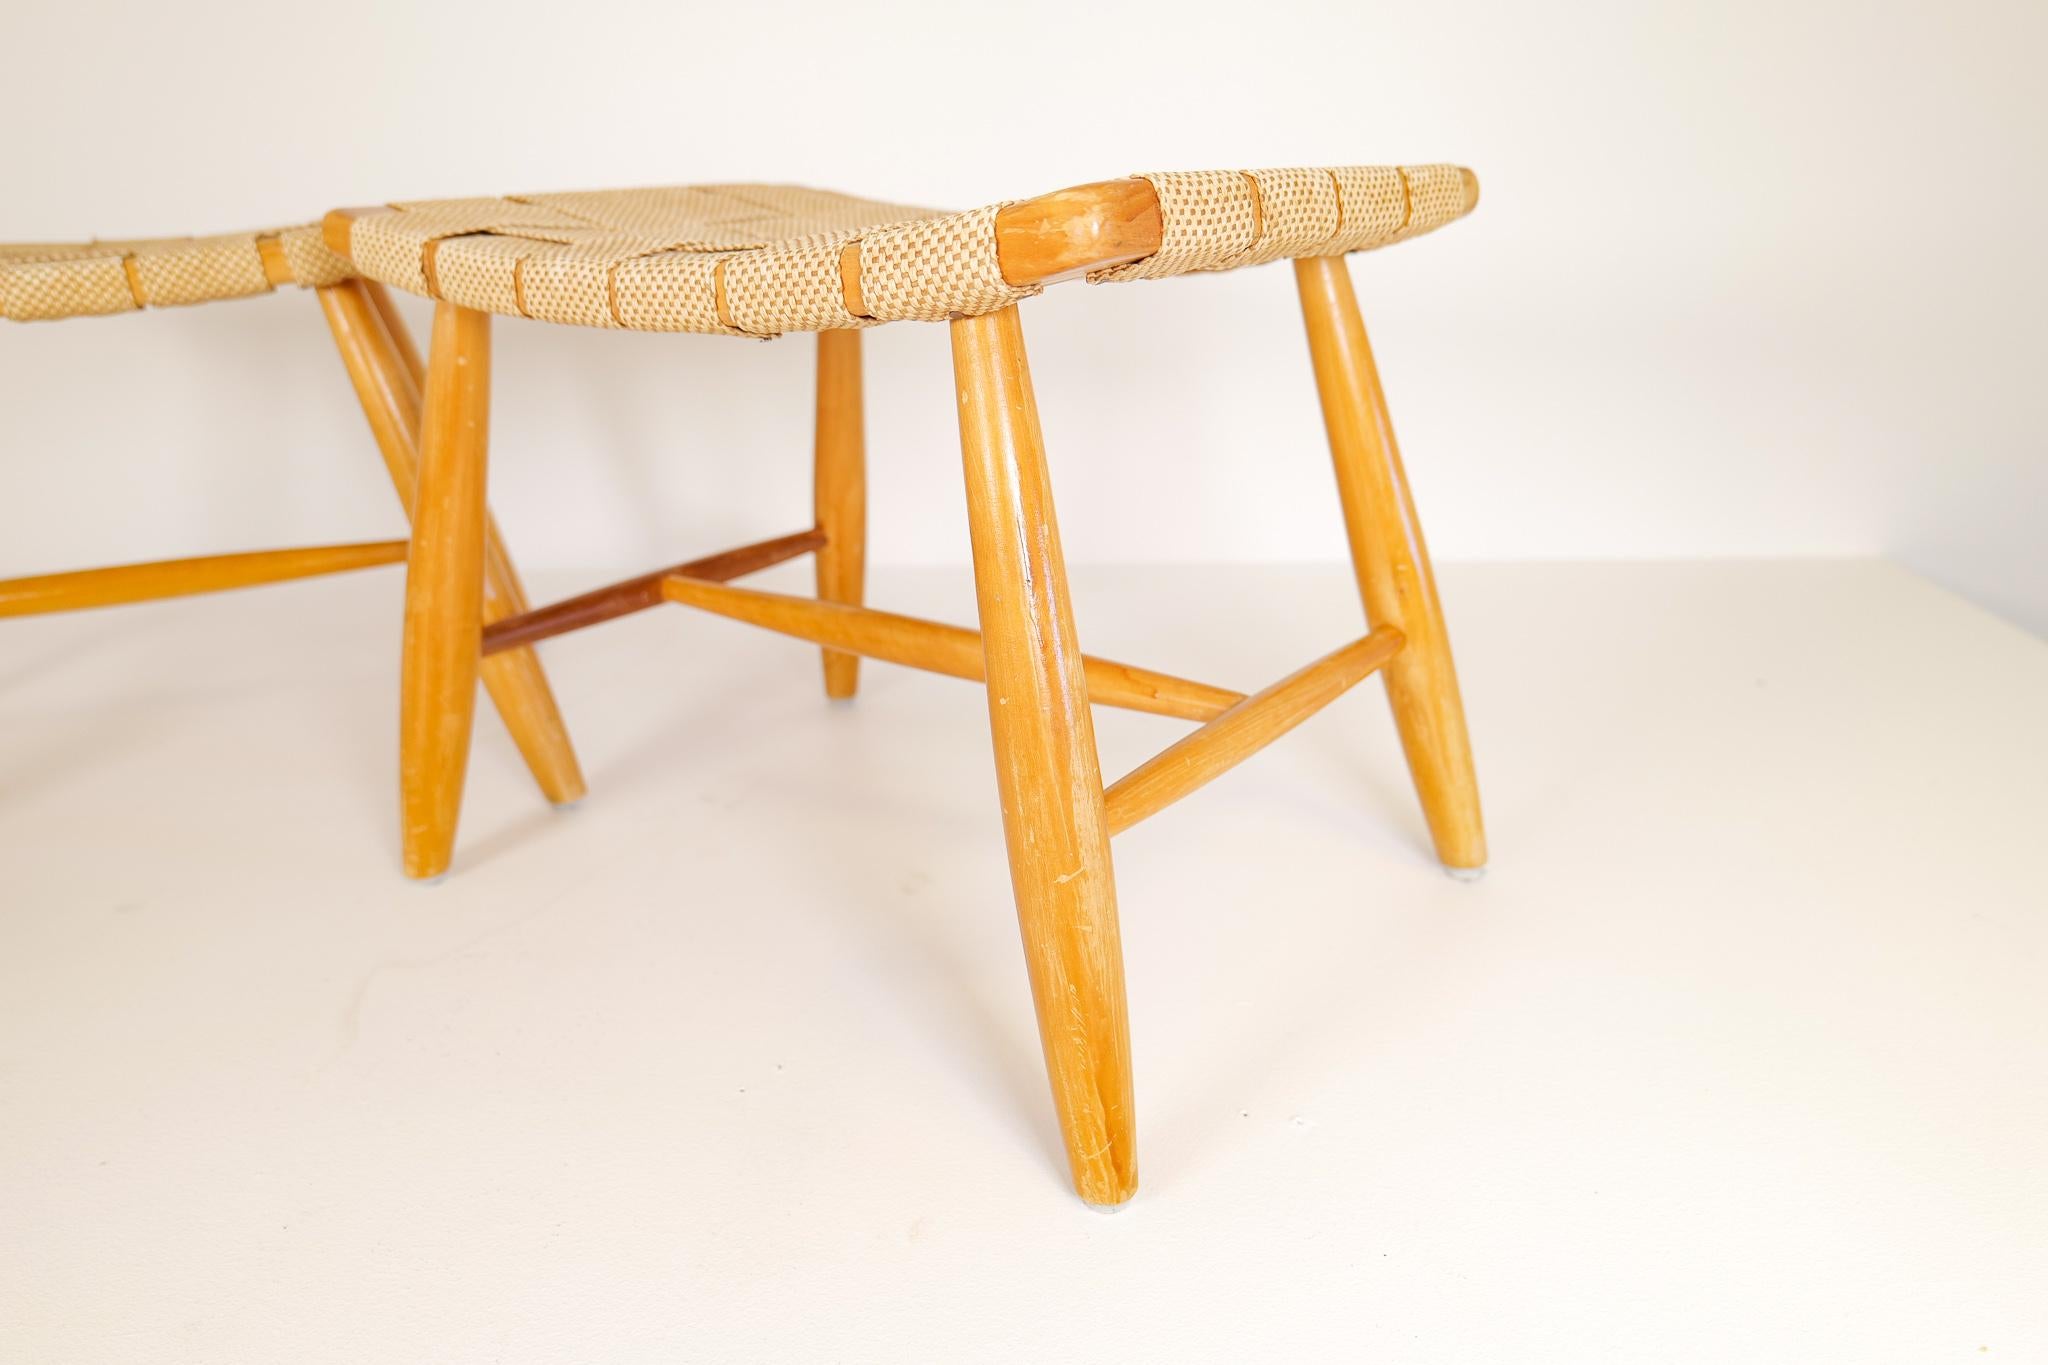 Midcentury Pair of Swedish Stools in Lacquered Birch, 1960s For Sale 1